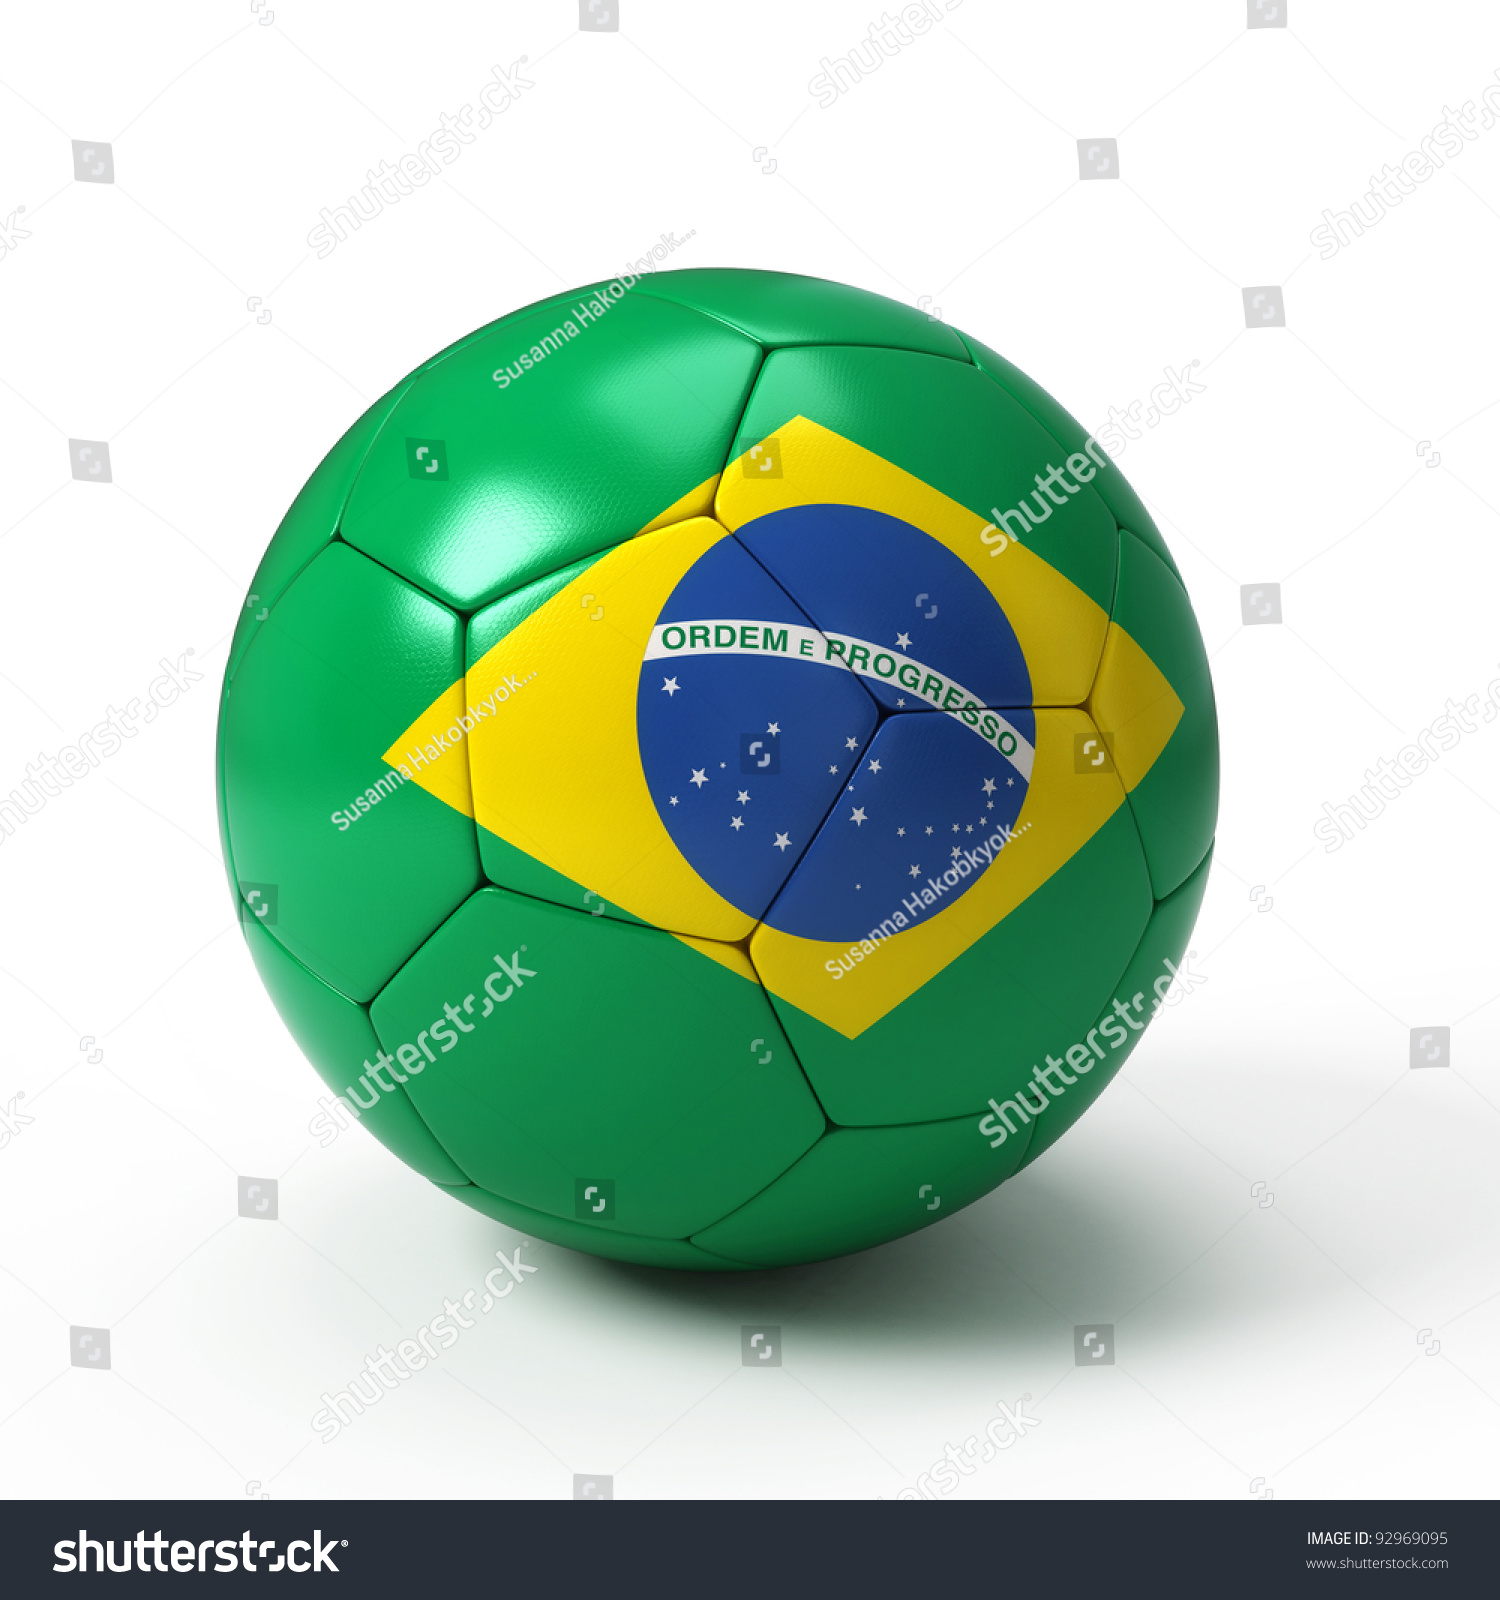 Soccer Ball With Brazilian Flag Isolated On White Stock Photo 92969095 ...